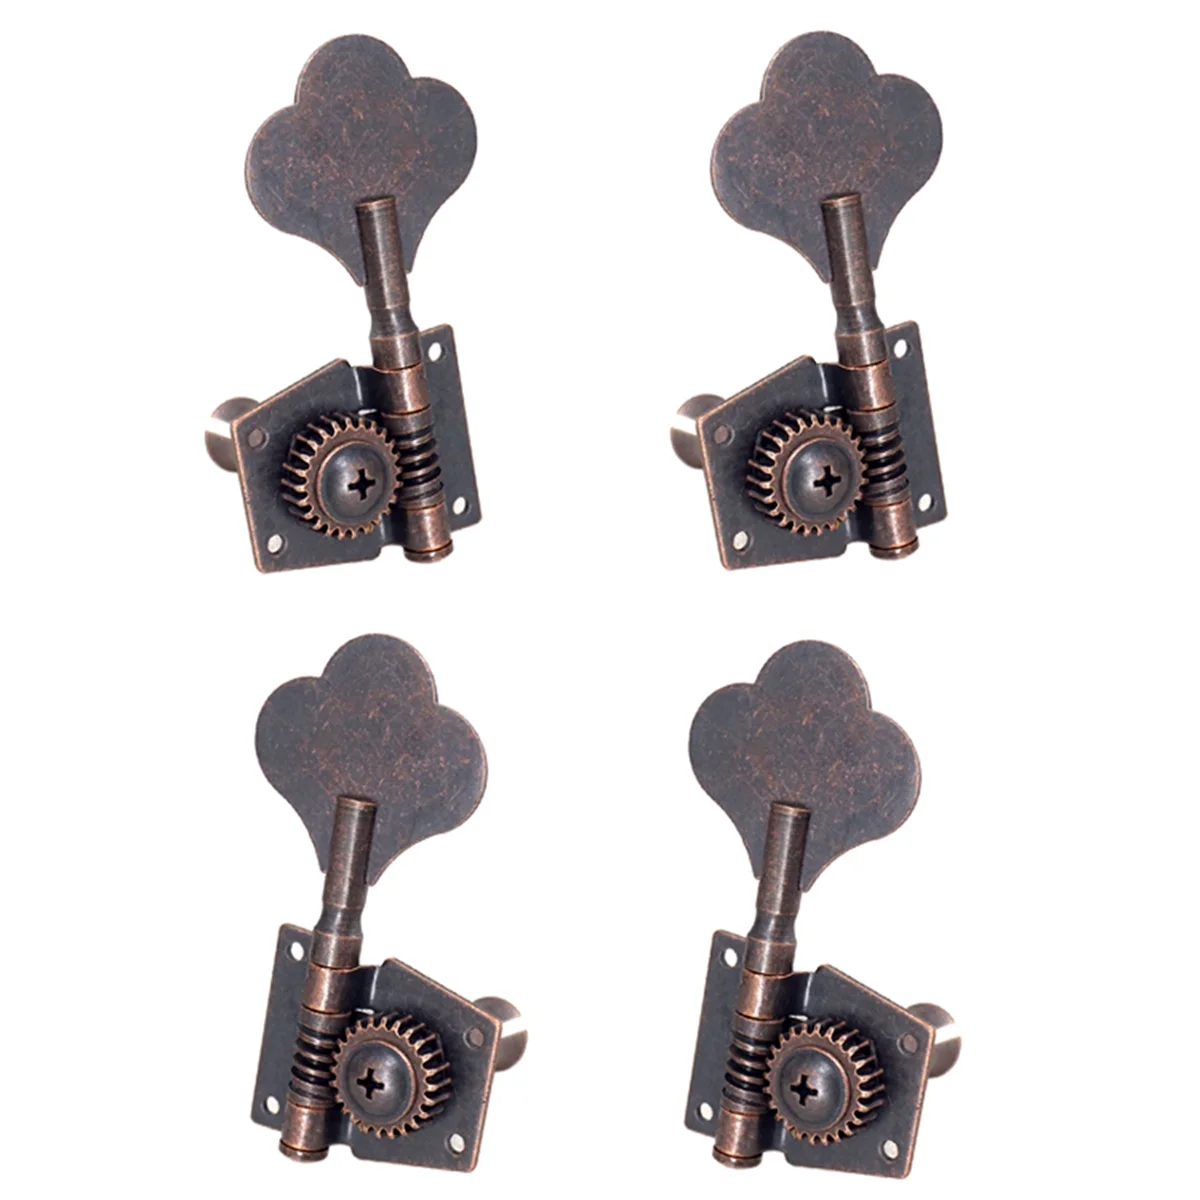 

Guitar Vintage Open Bass Guitar Tuning Key Pegs Machine Heads Tuners 2L2R for 4 Strings Bass Red Bronze